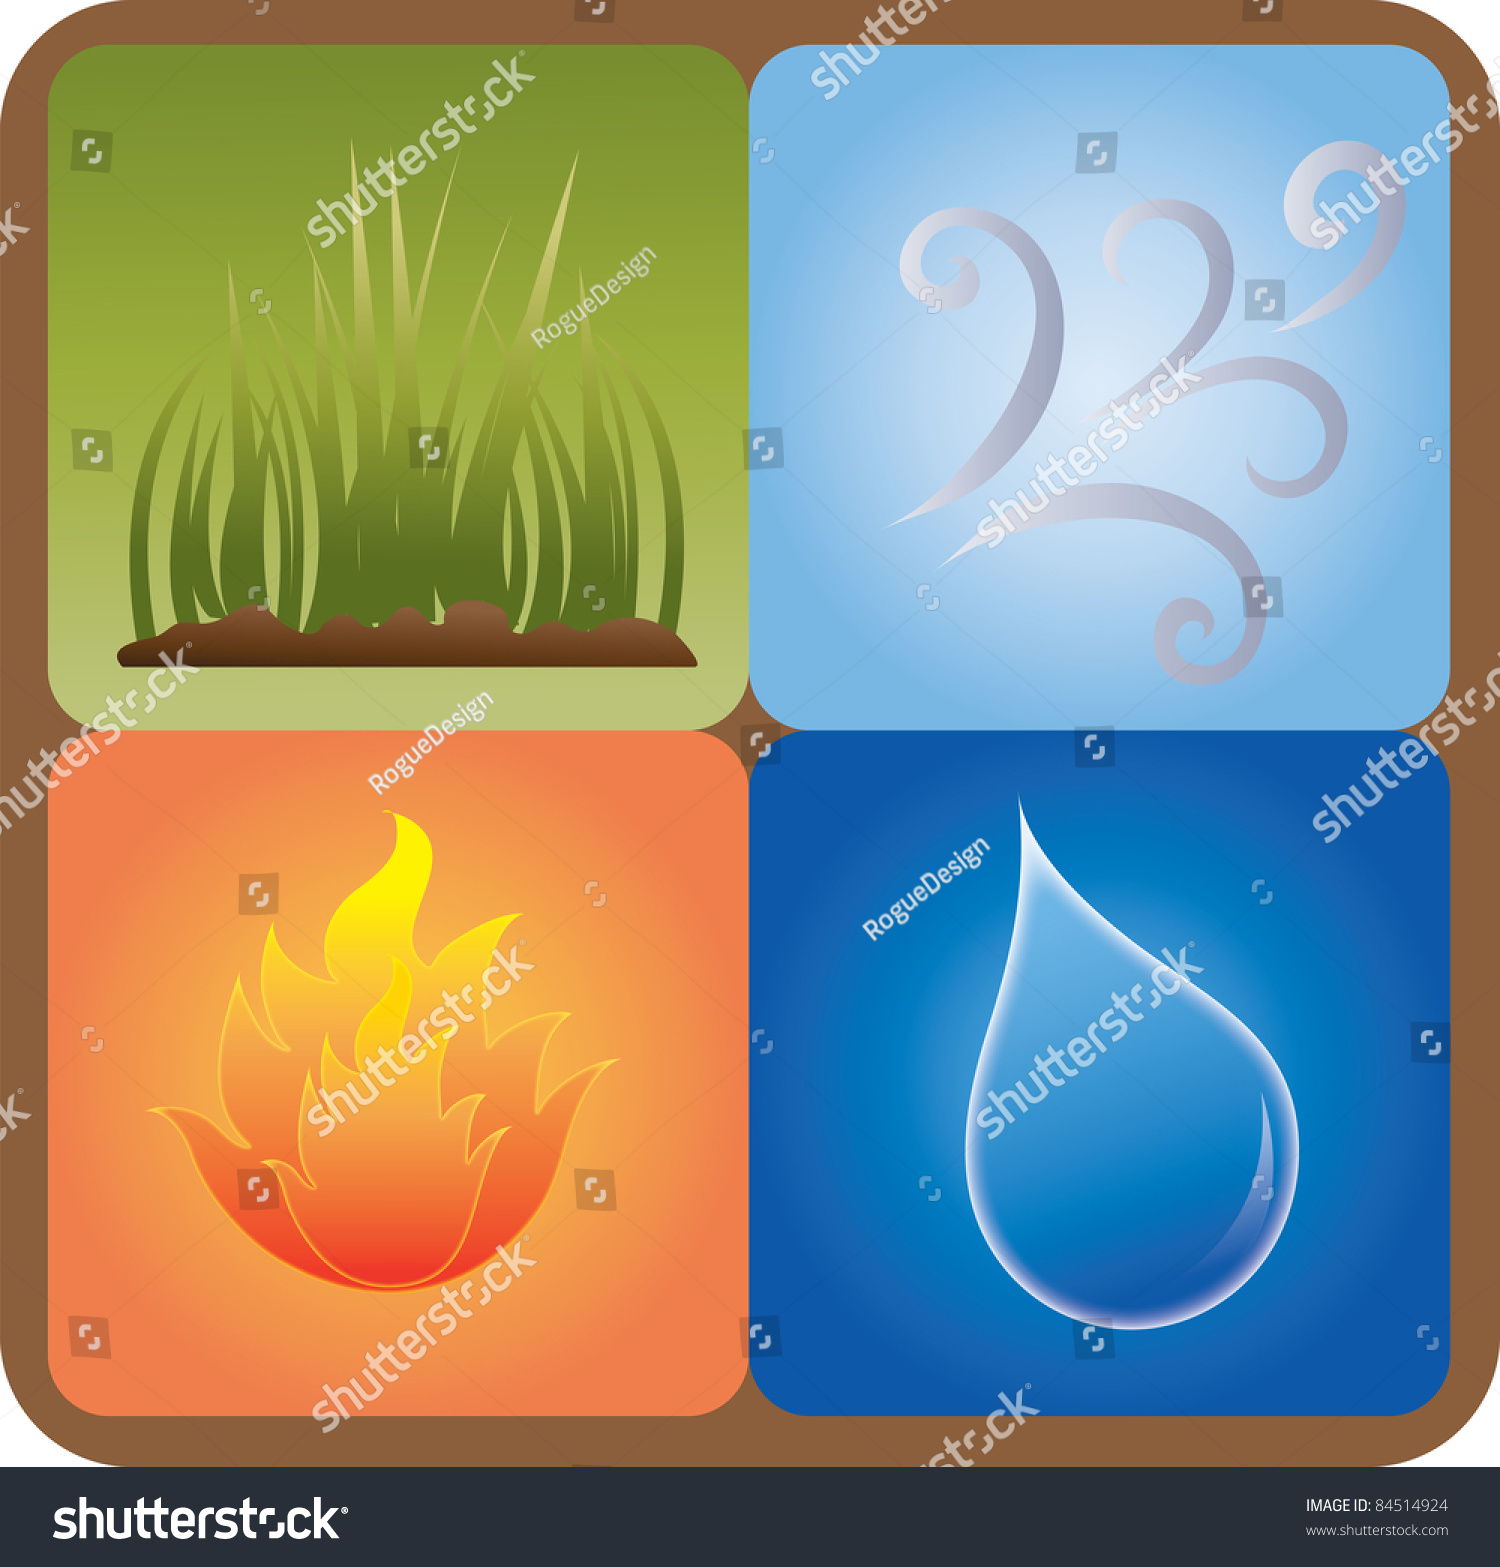 nature photography clipart - photo #29